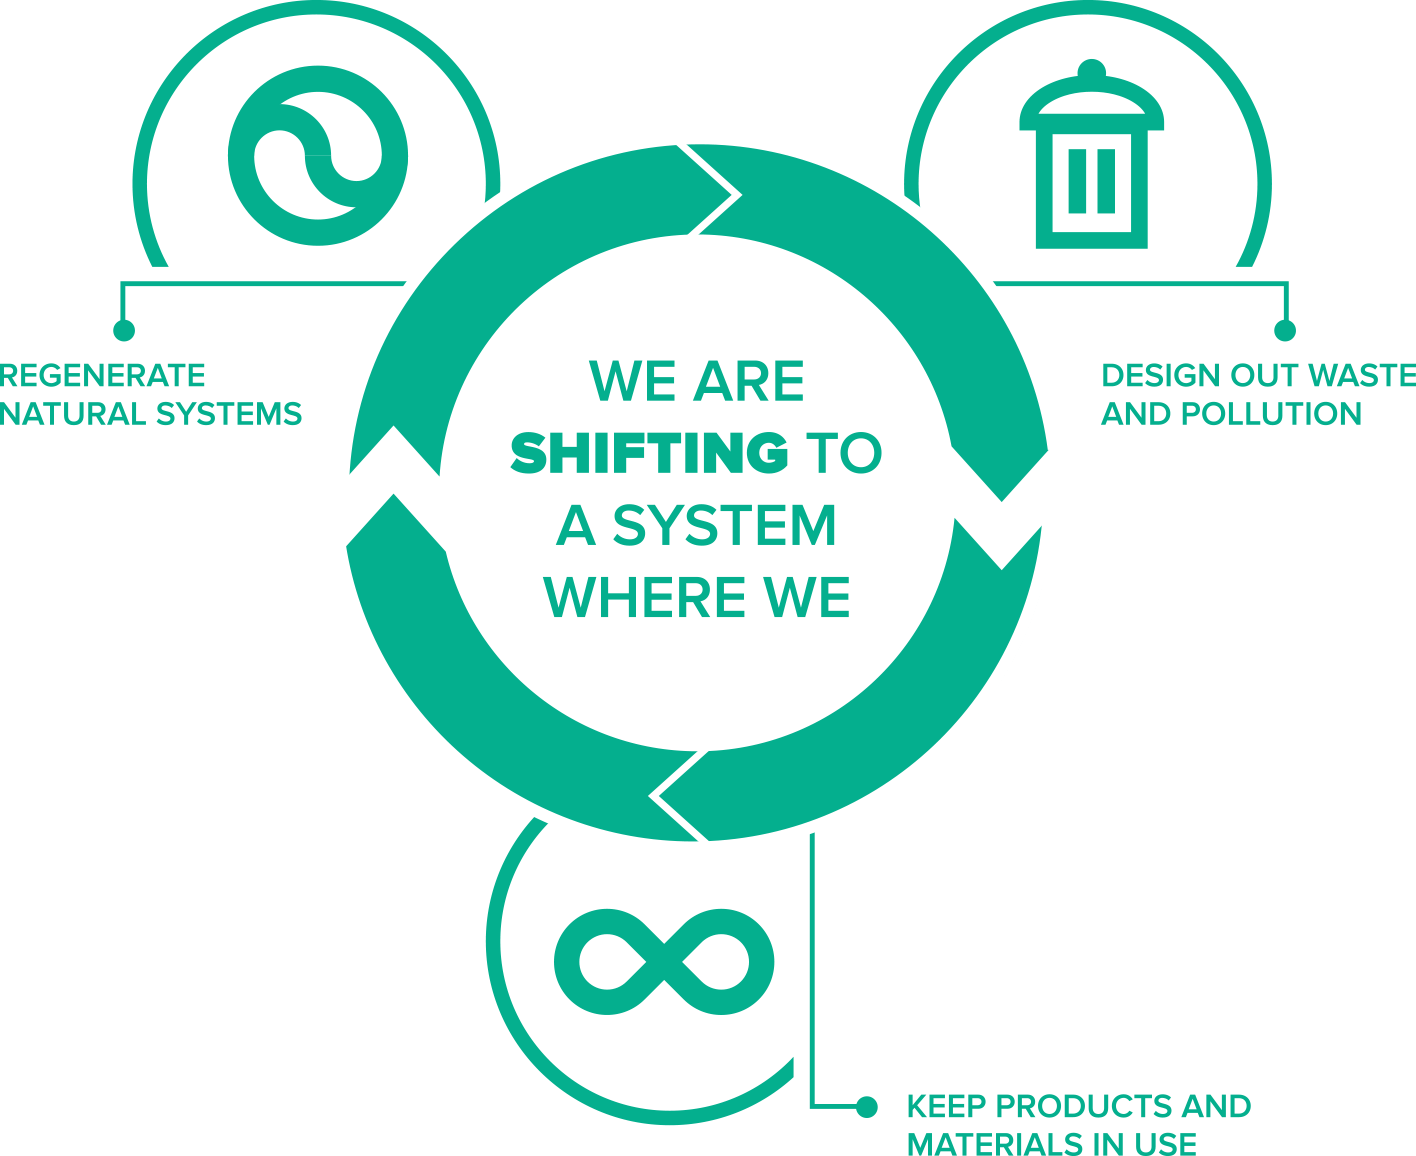 We are shifting to a system where we design out waste and pollution, keep products and materials in use, regenerate natural systems